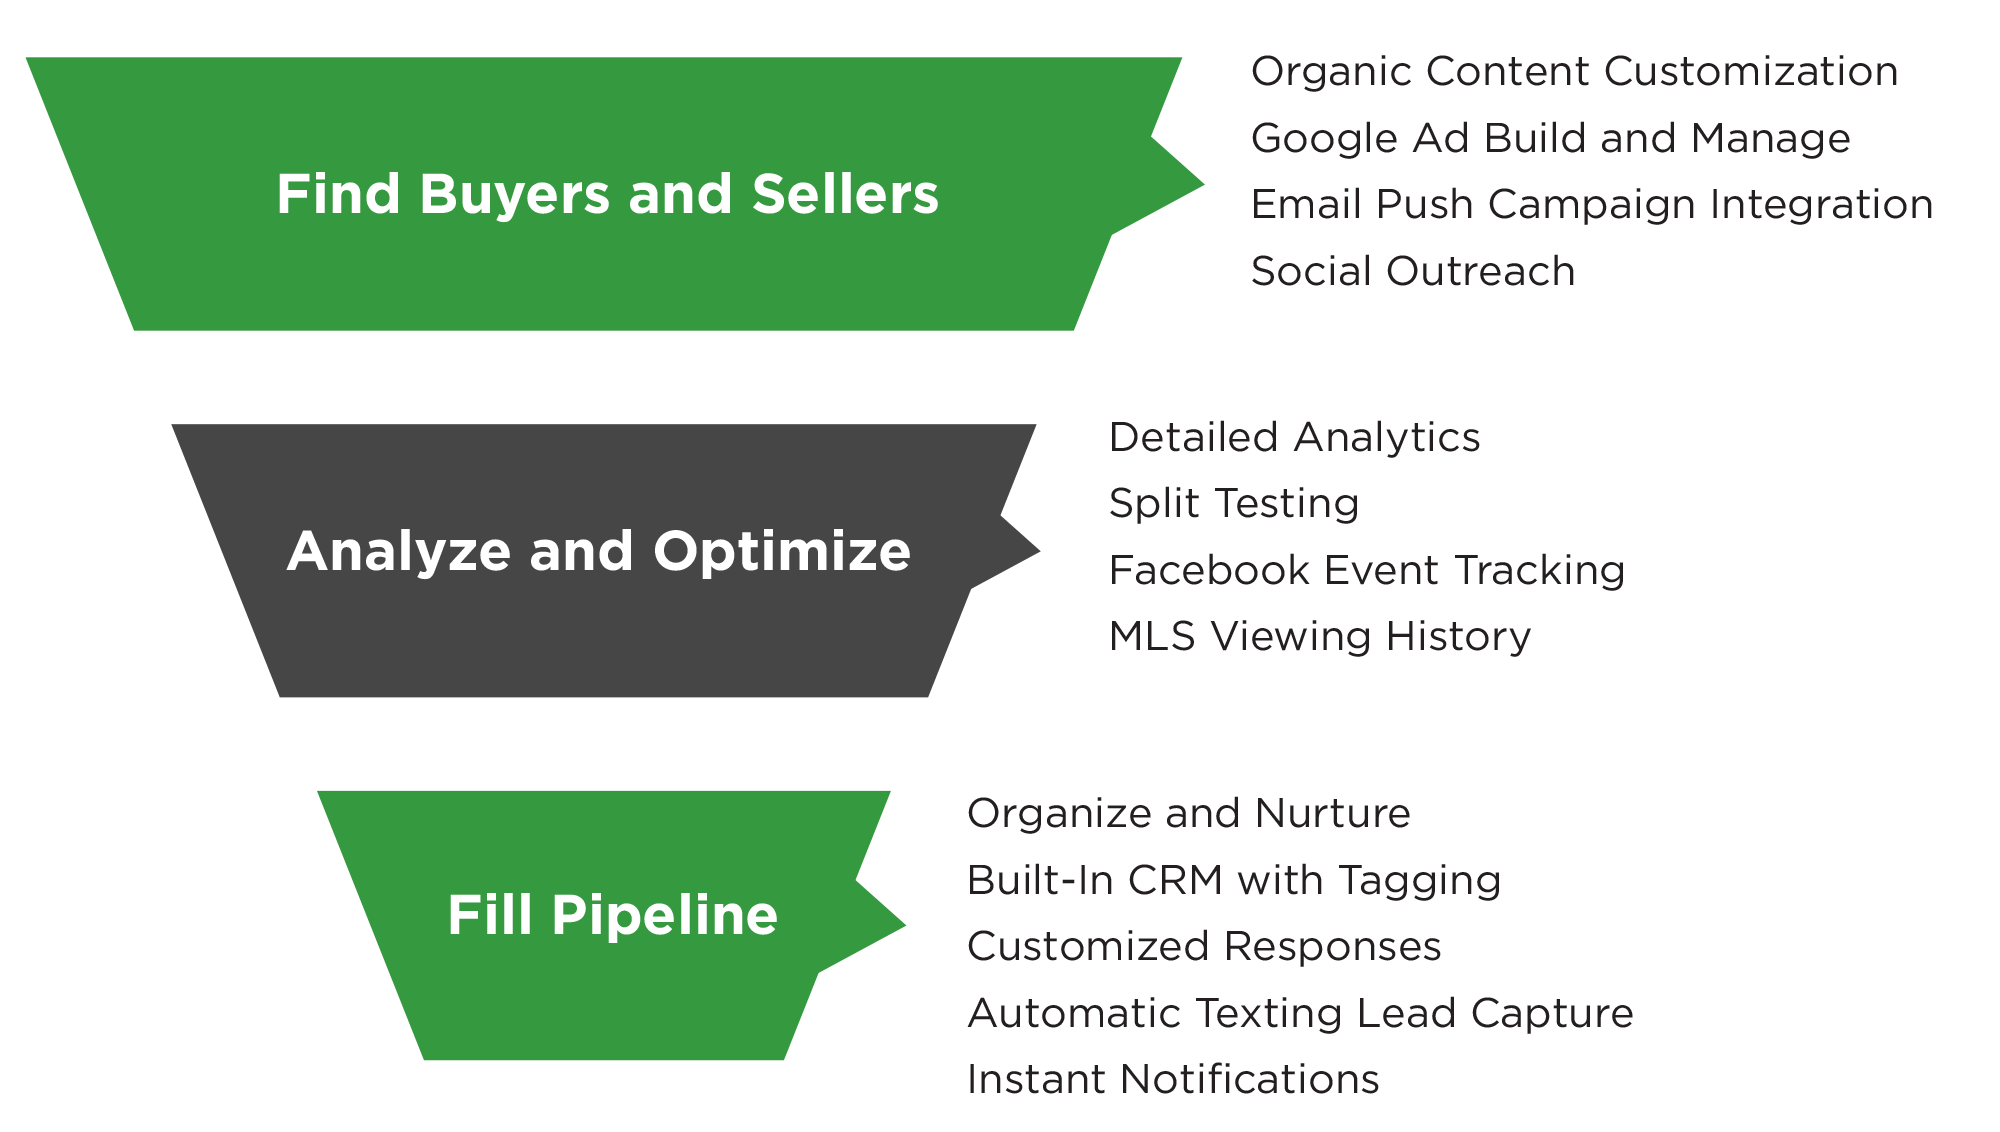 Organic Content Customization, Google Ad Build and Manage, Email Push Campaign Integration, Social Outreach, Detailed Analytics, Split Testing, Facebook Event Tracking, MLS Viewing History, Organize and Nurture Build-in CRM with Tagging, Customized Responses, Automatic Texting Lead Capture, Instant Notifications